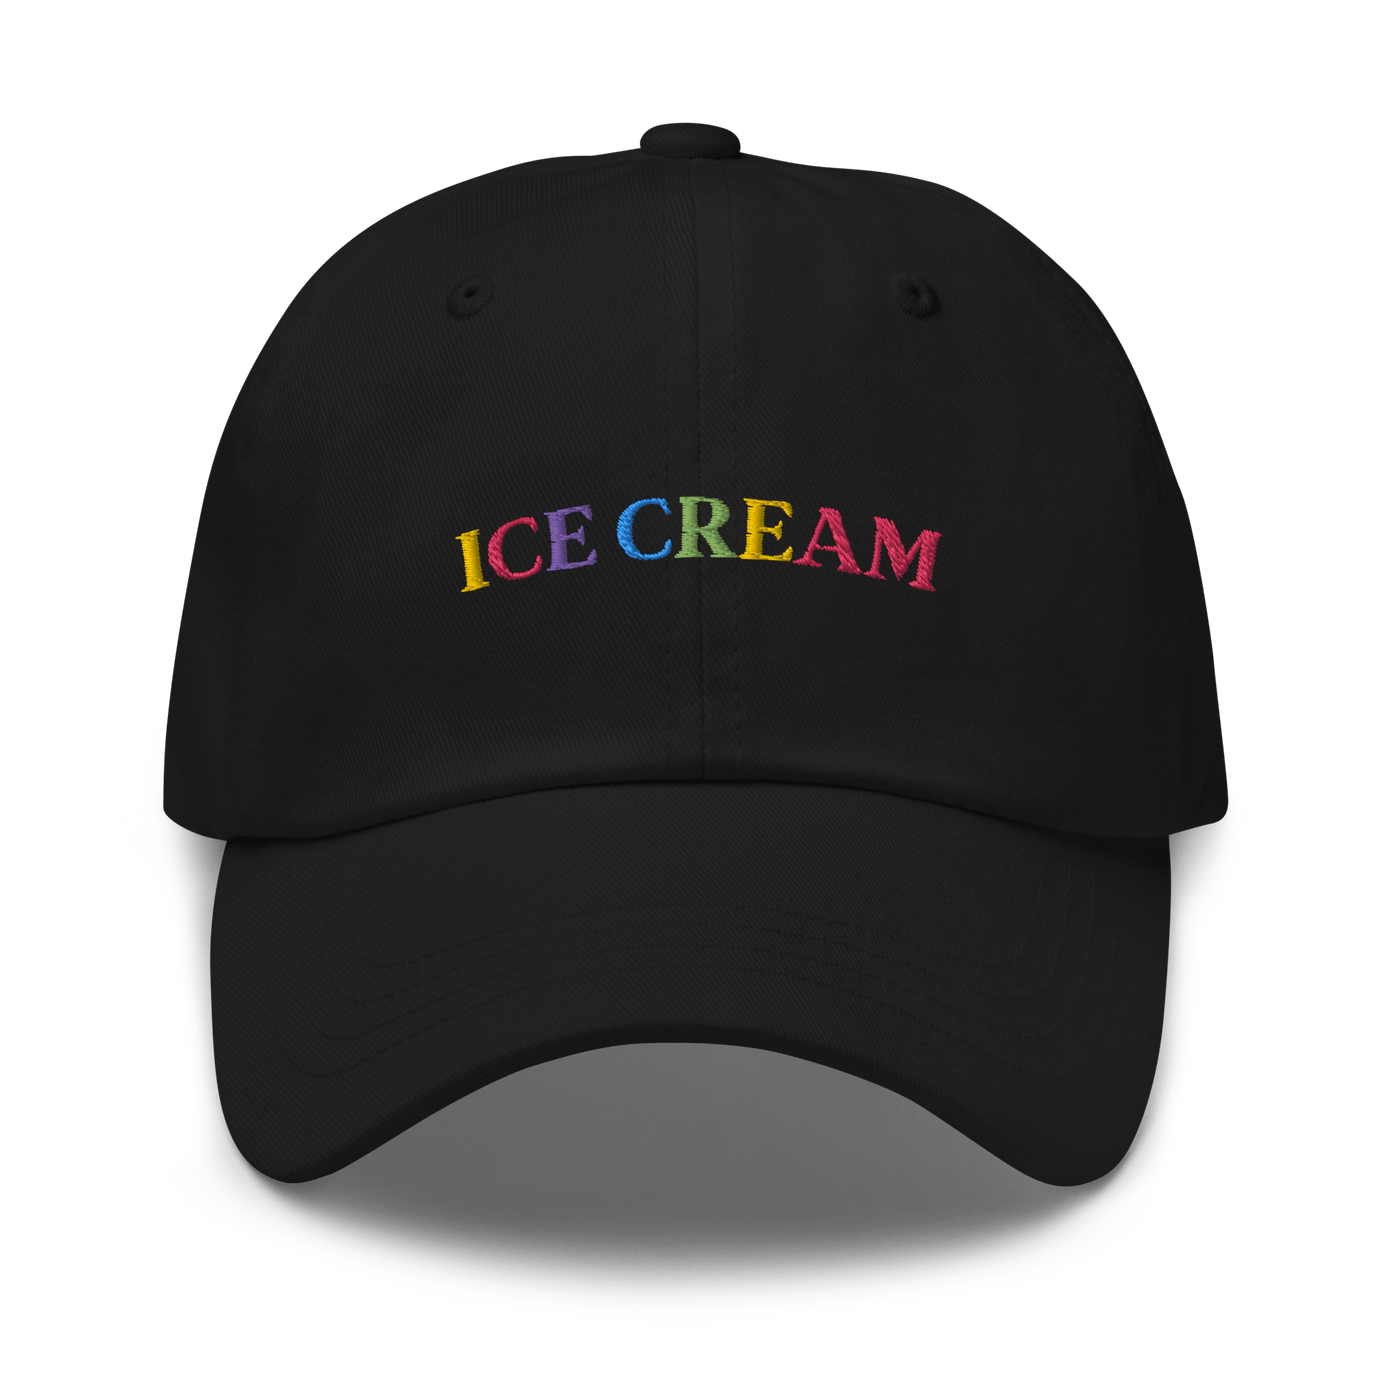 Ice Cream Text Dad hat - Black - - Just Another Cap Store